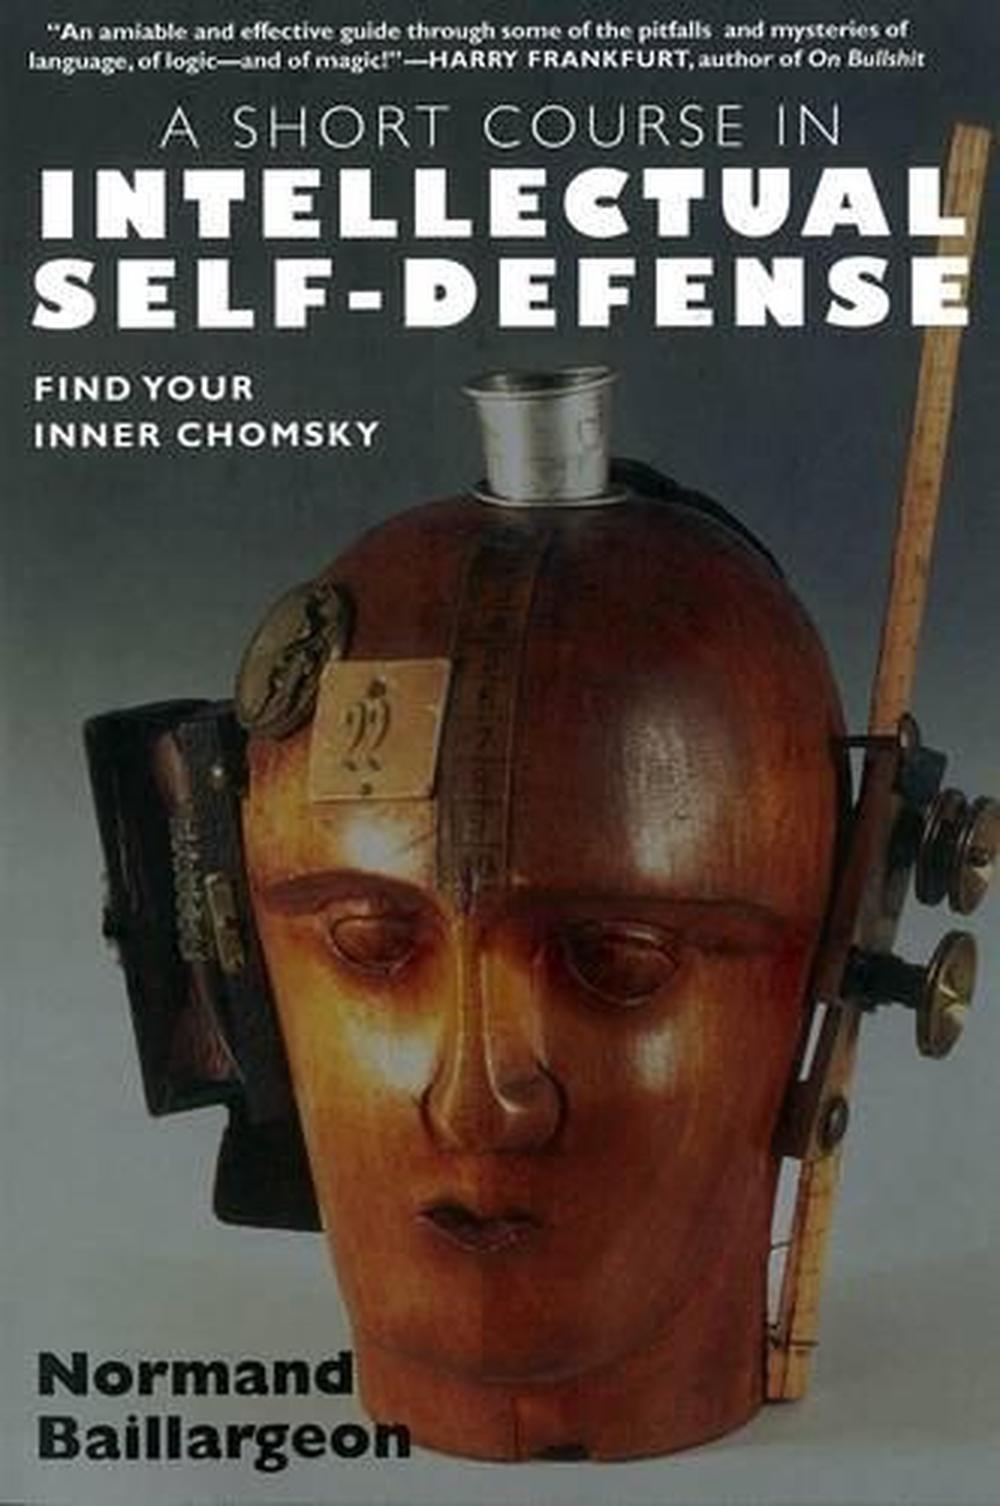 A Short Course in Intellectual SelfDefense by Normand Baillargeon